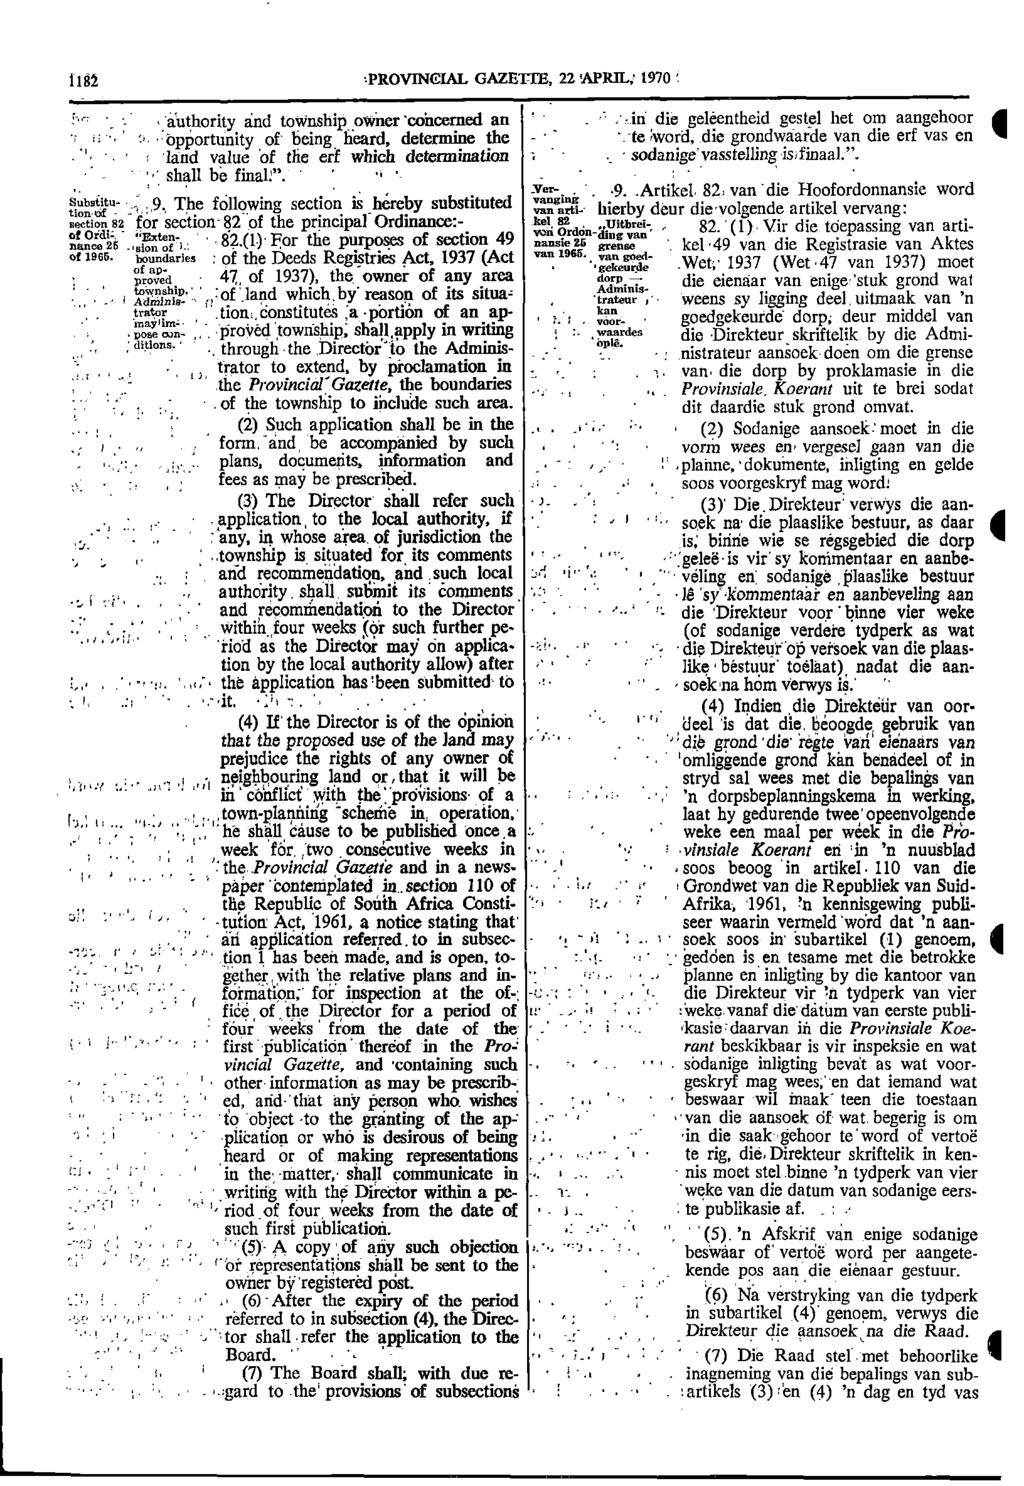 of 1182 PROVINCIAL GAZETTE 22 APRIL; 1970 Piuthority and township owner concerned an Opportunity of being heard determine the : land value of the erf which determination ; t ; shall be final" : Ivor